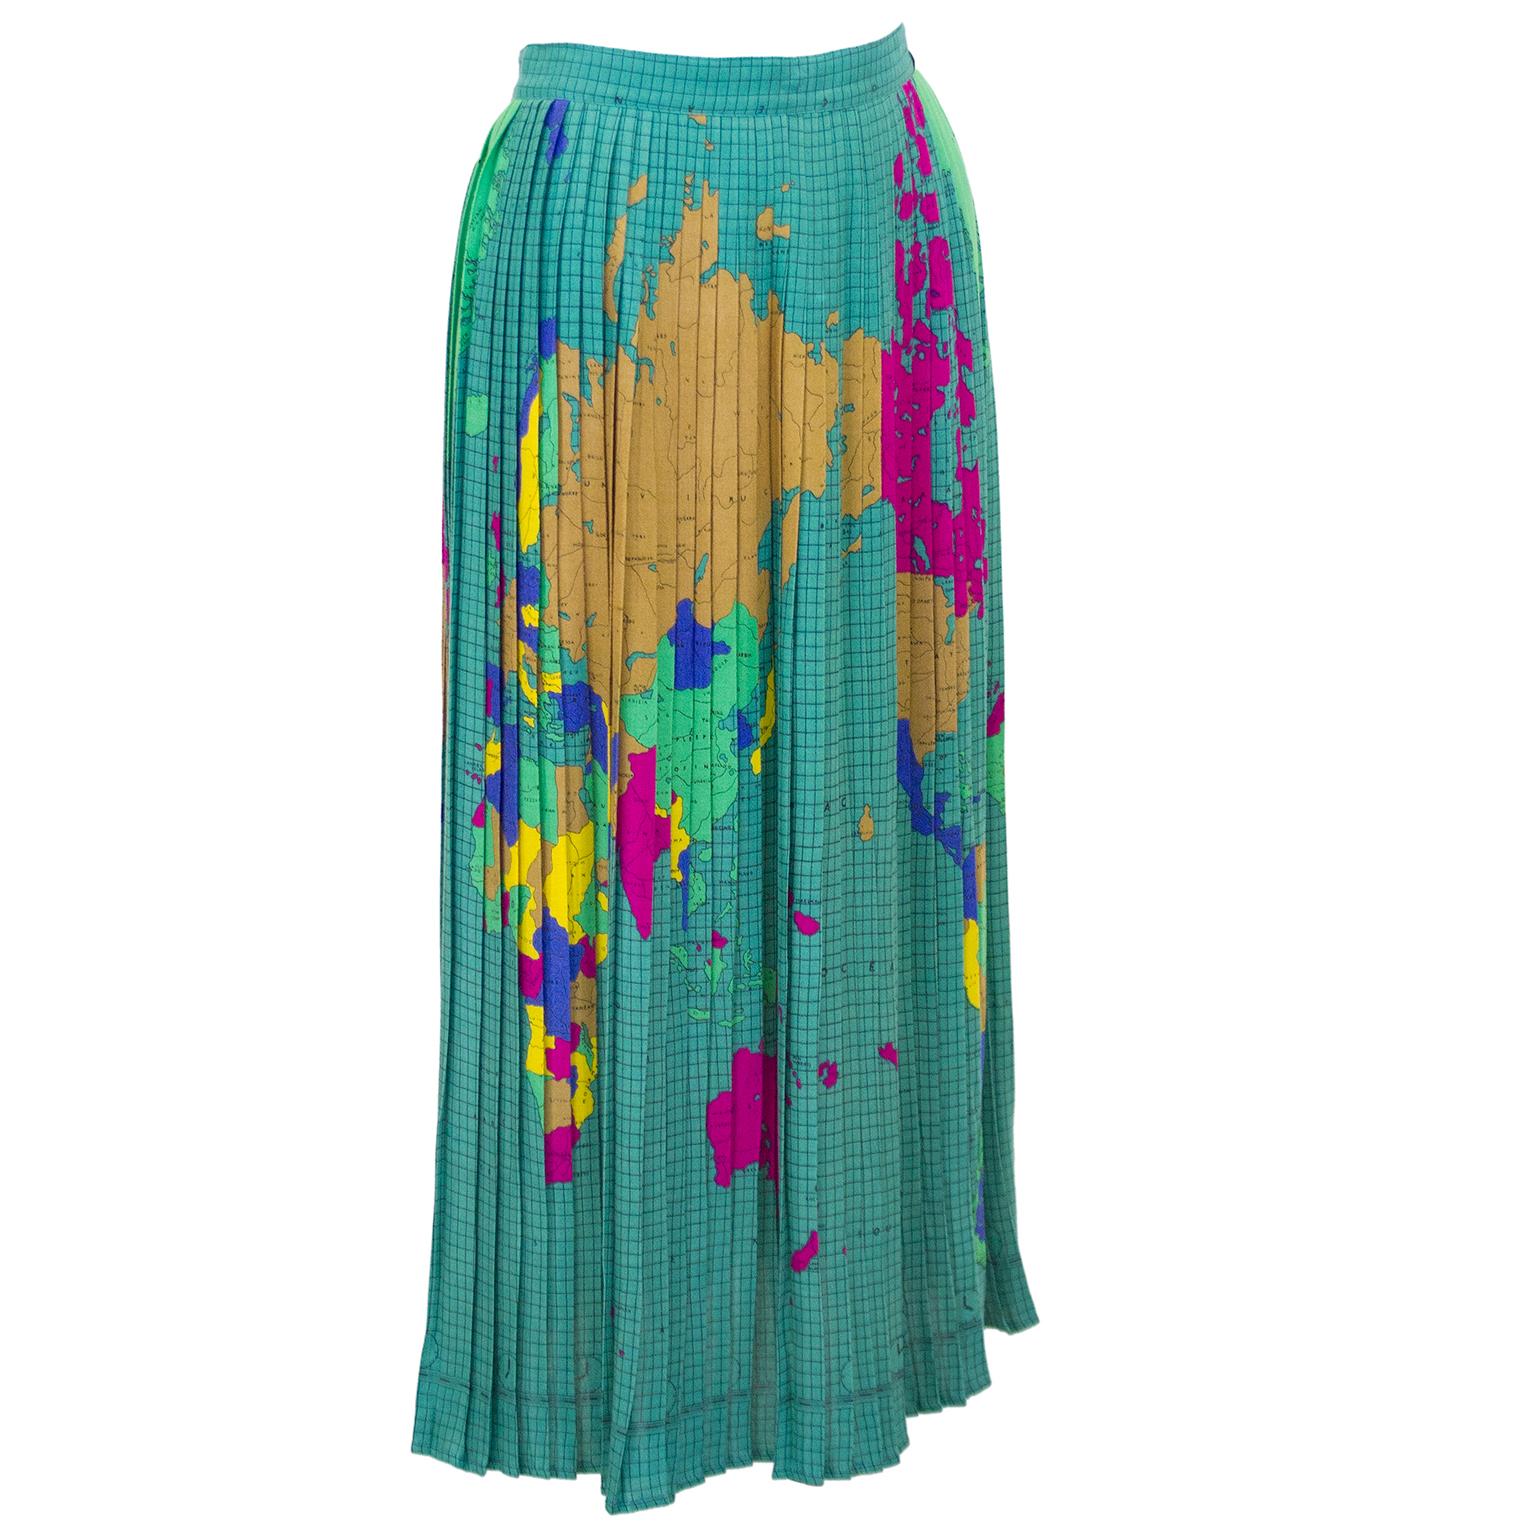 Unique and hard to find Fiorucci pleated skirt from the 1970s. The skirt features an allover pattern of the map of the world in vibrant jewel tones. Fastens in the back with a zipper and button on the waistband. Small fit US 2. Dry cleaned and ready